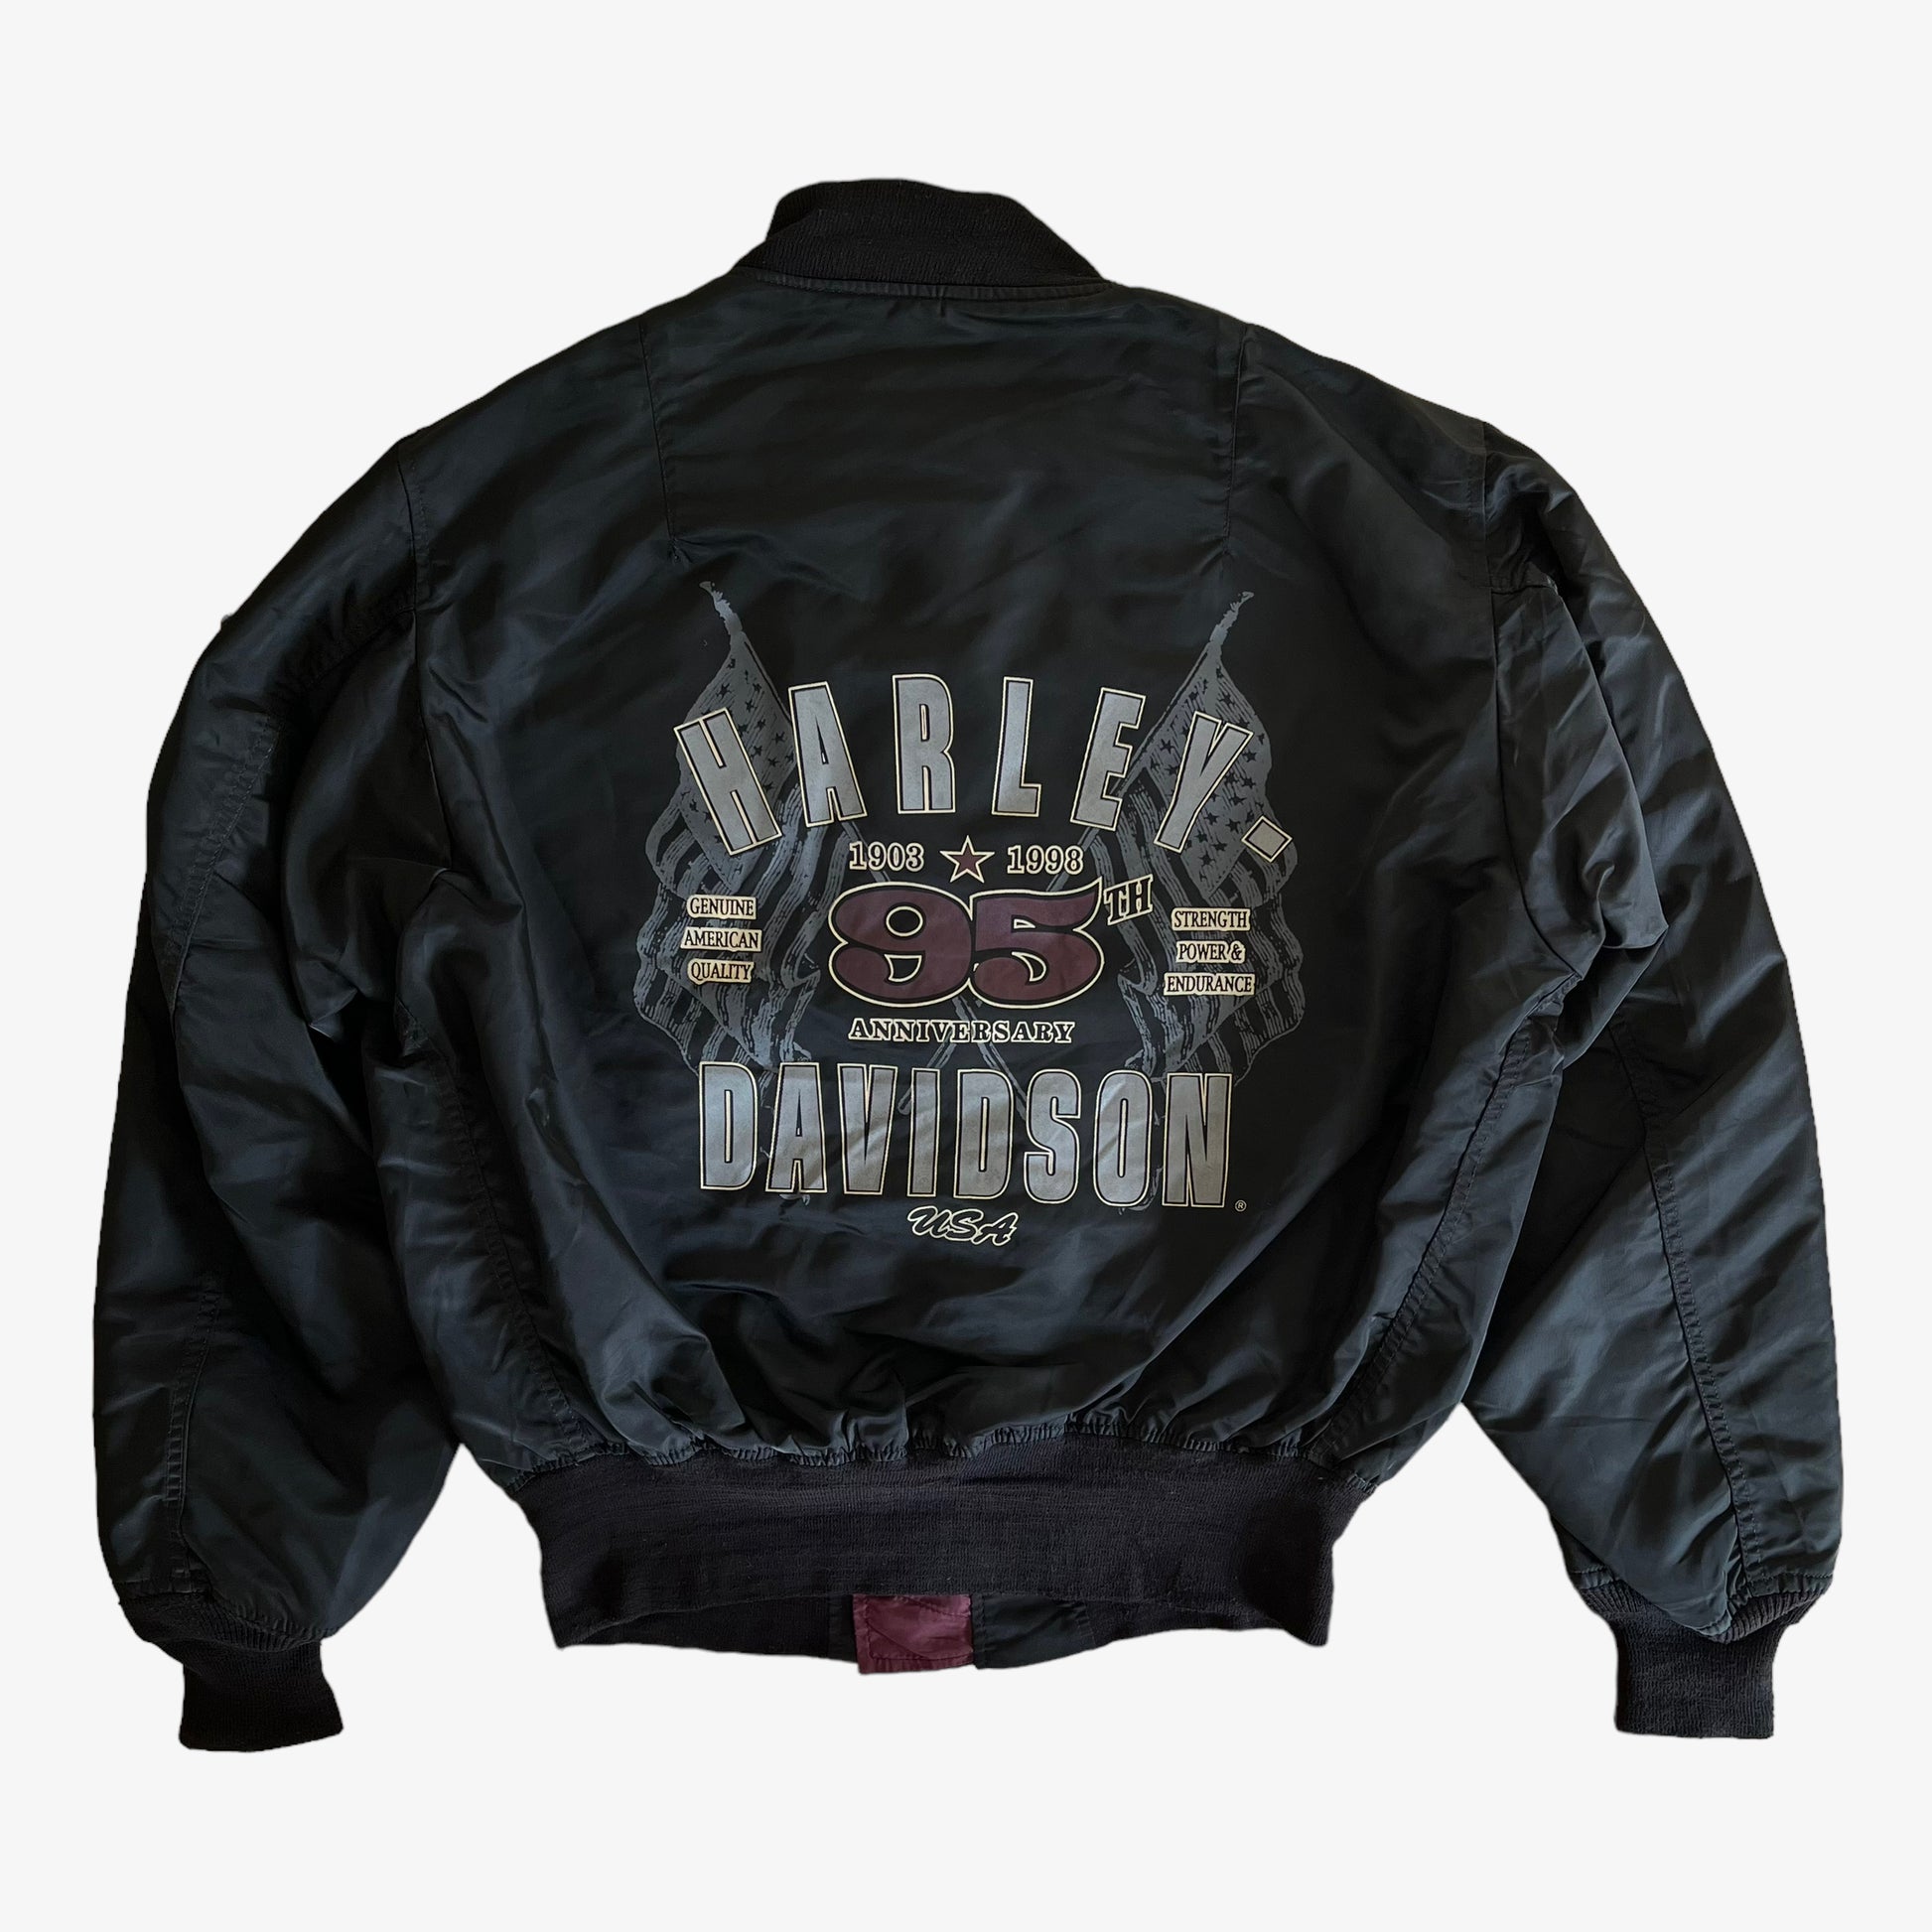 Vintage 1998 Harley Davidson 95th Anniversary Bomber Jacket With Back Spell Out Back - Casspios Dream